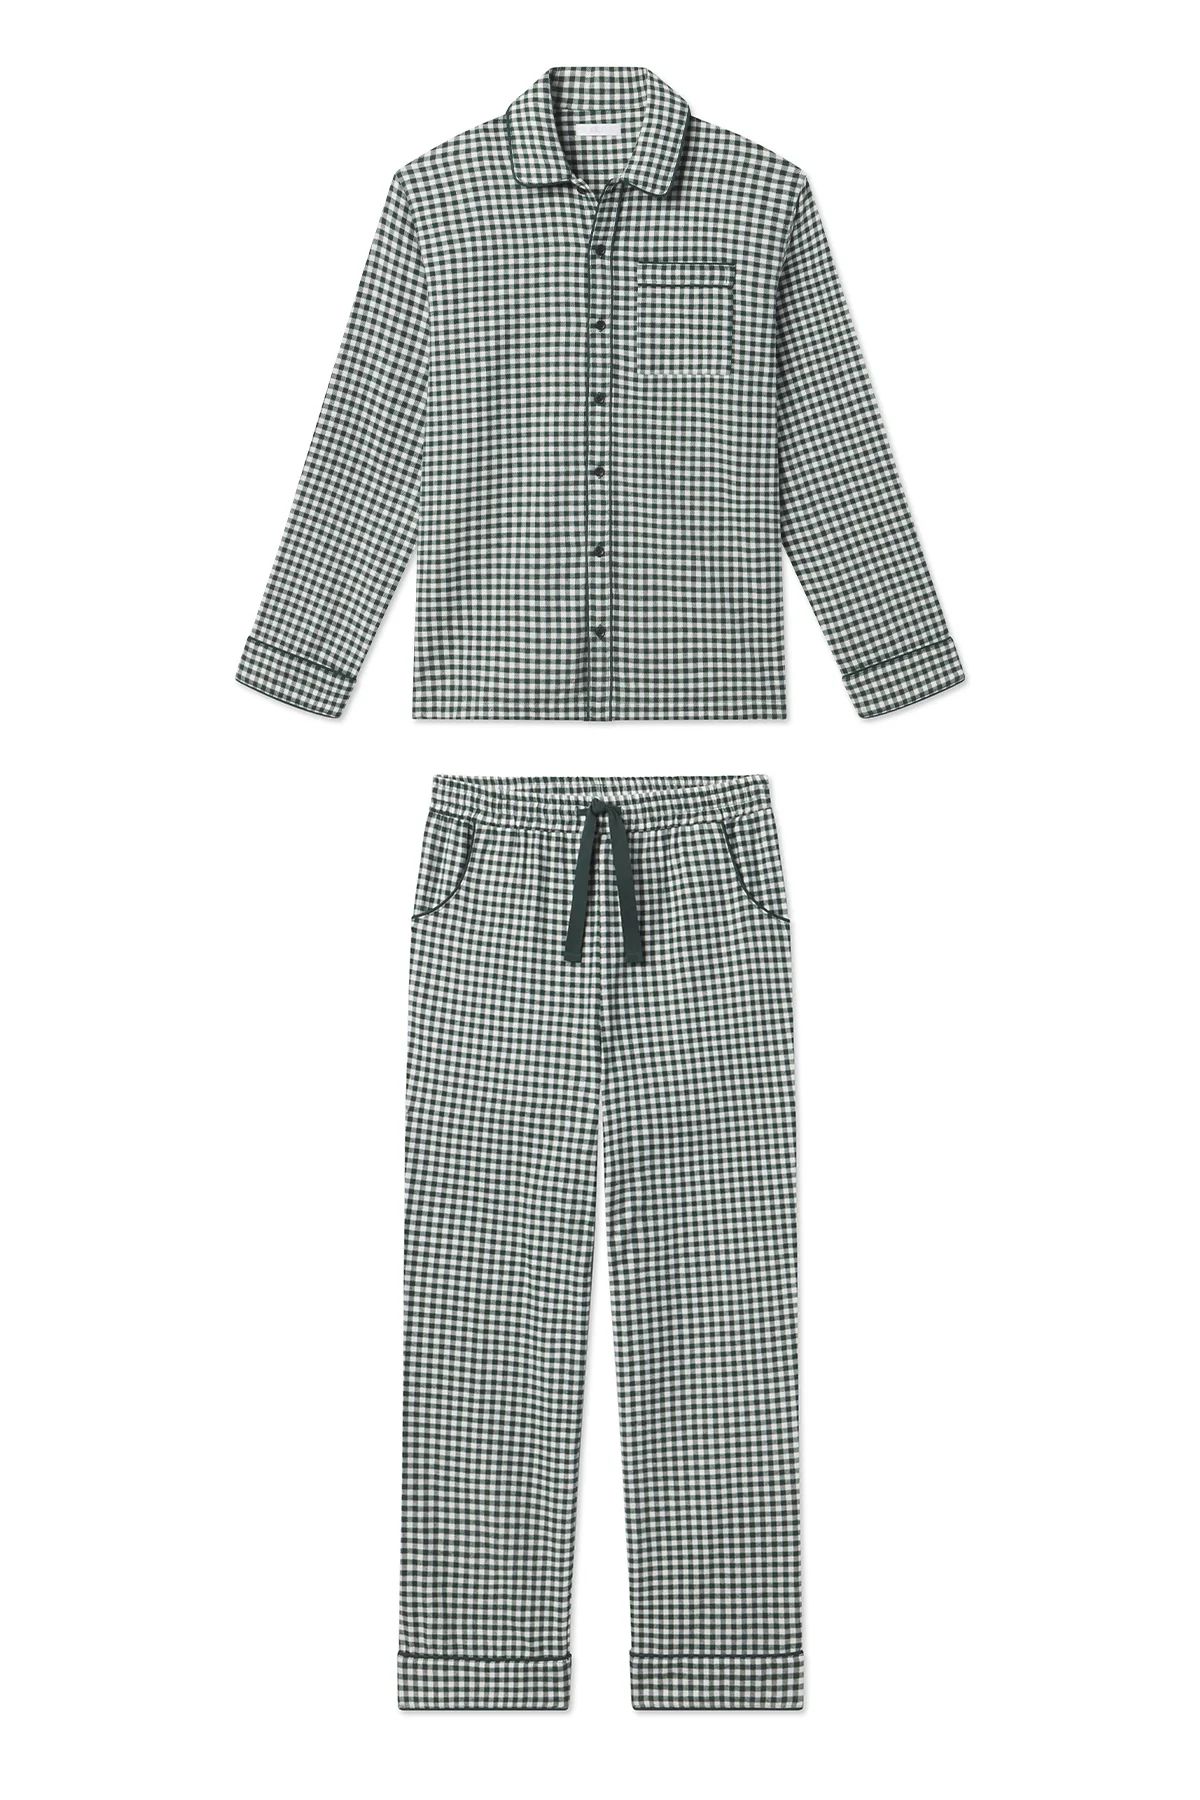 Men's Flannel Piped Pants Set in Conifer Gingham | Lake Pajamas